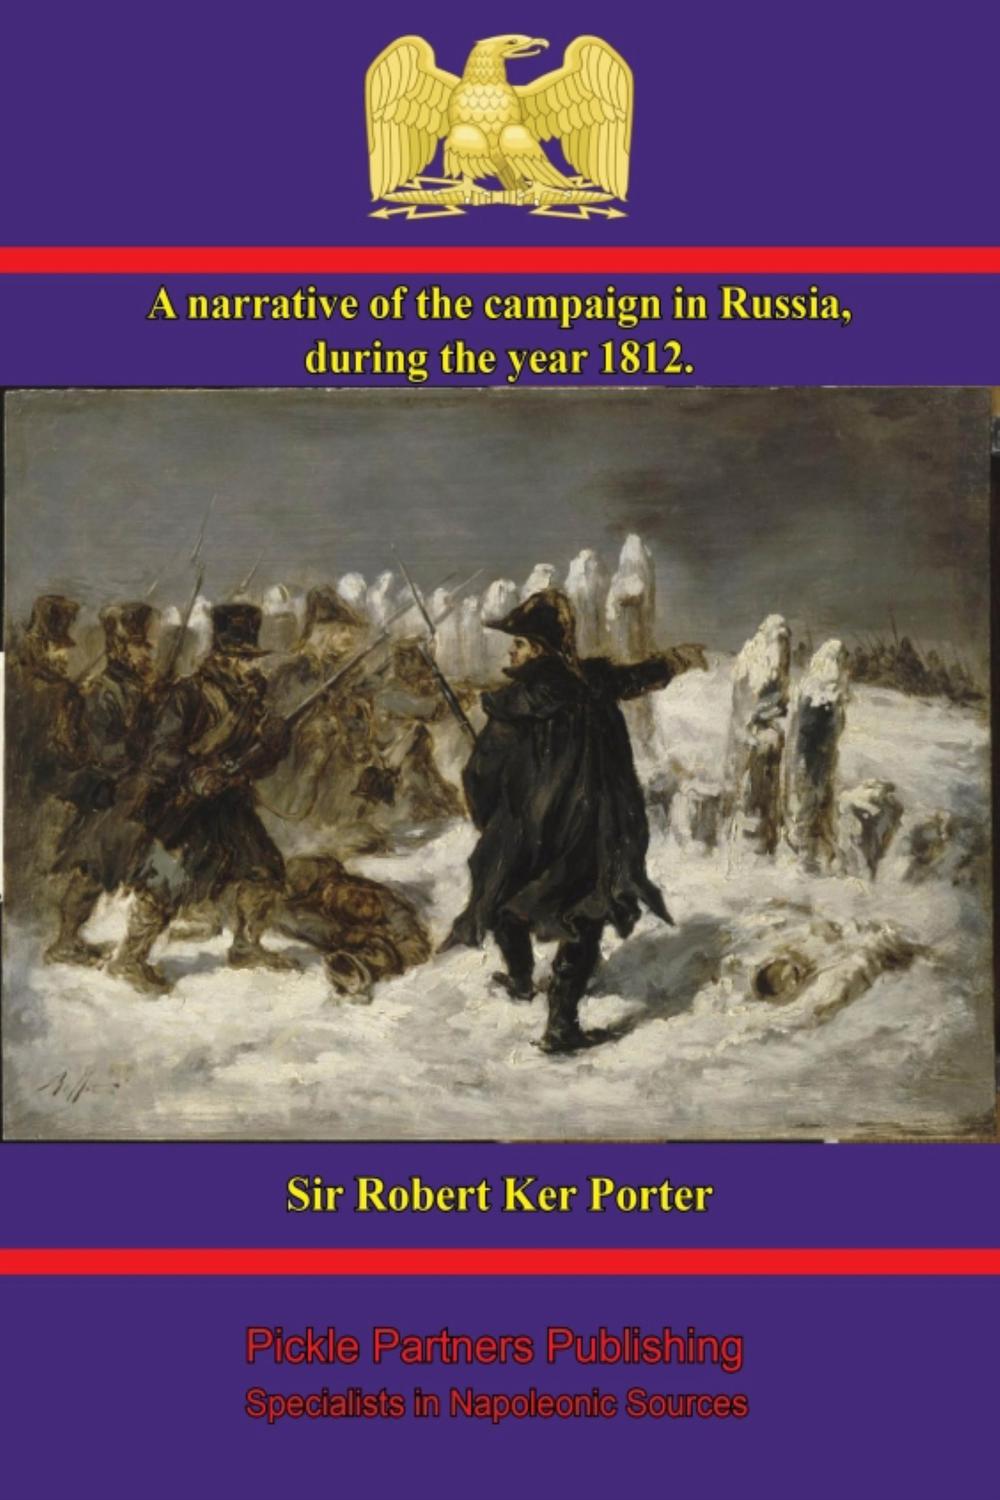 A narrative of the campaign in Russia, during the year 1812 - Sir Rober Ker Porter